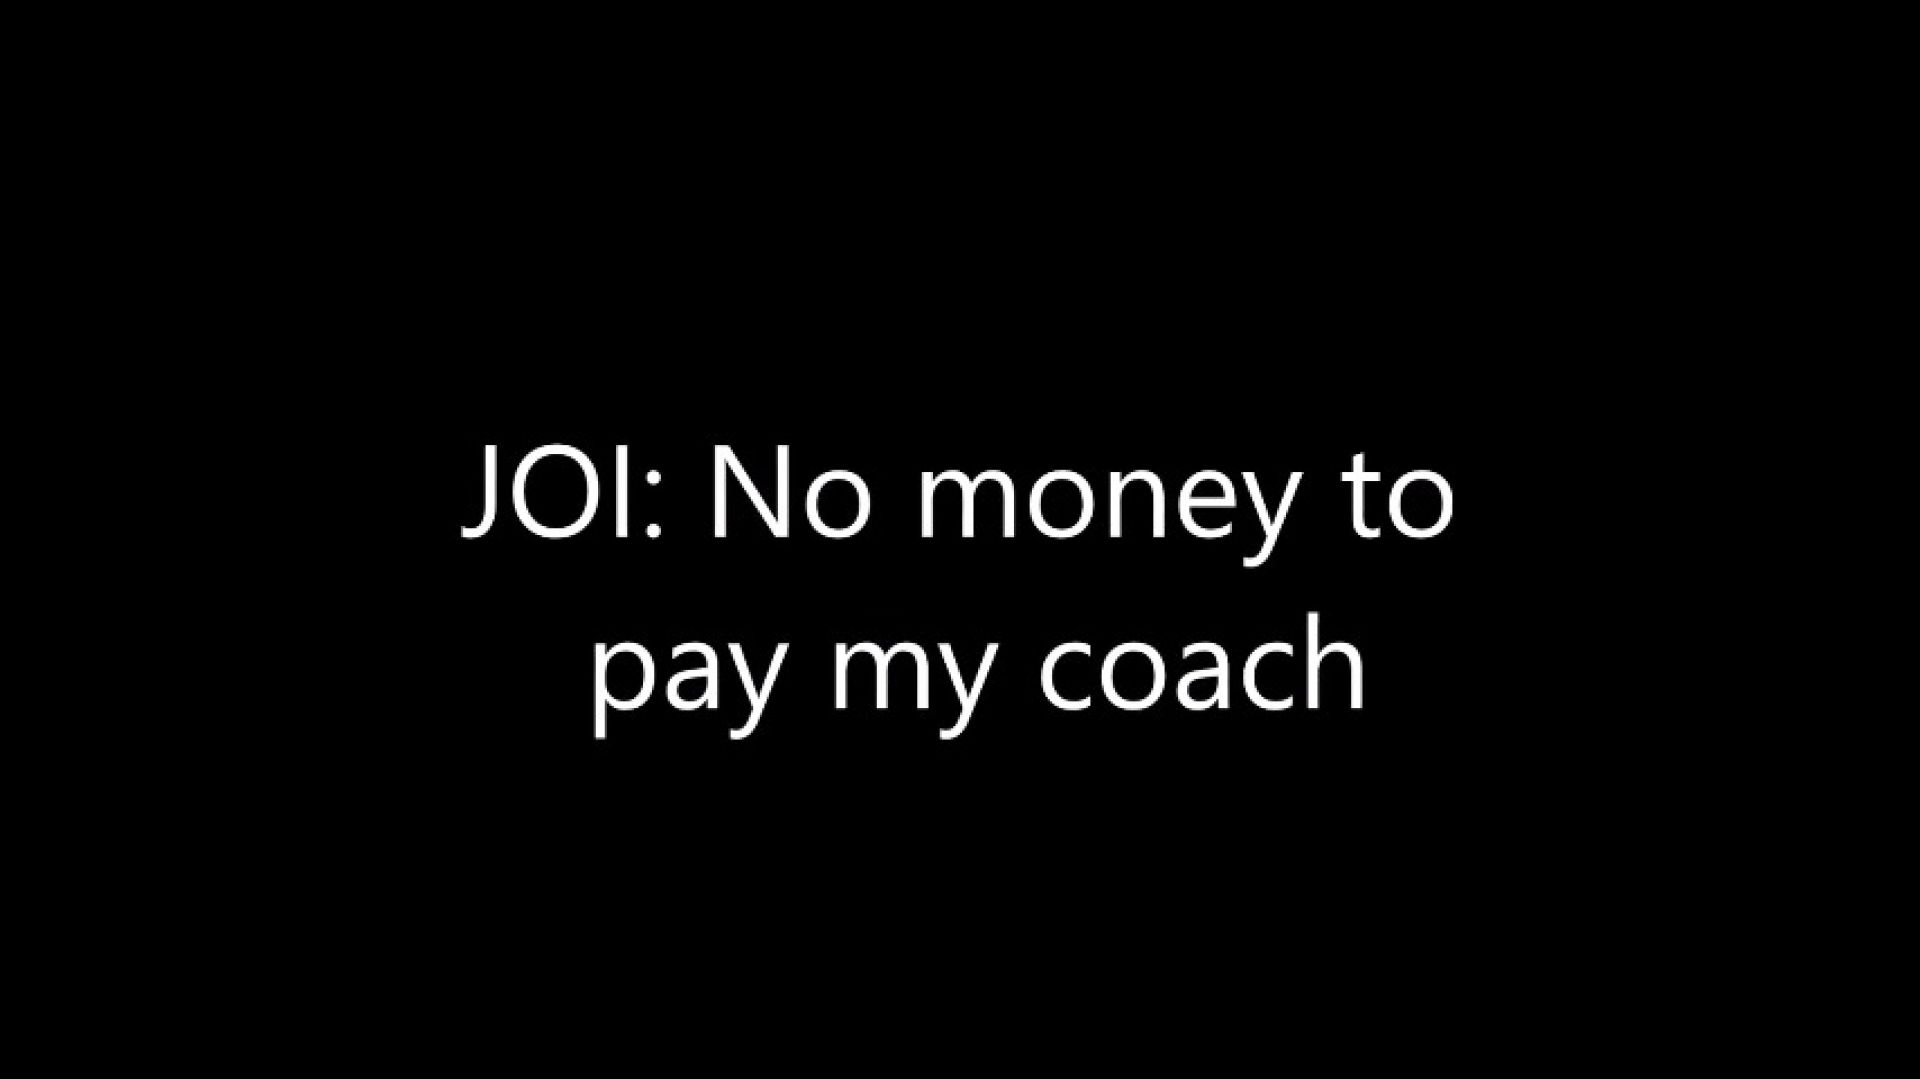 leaked JOI: No money to pay my coach thumbnail